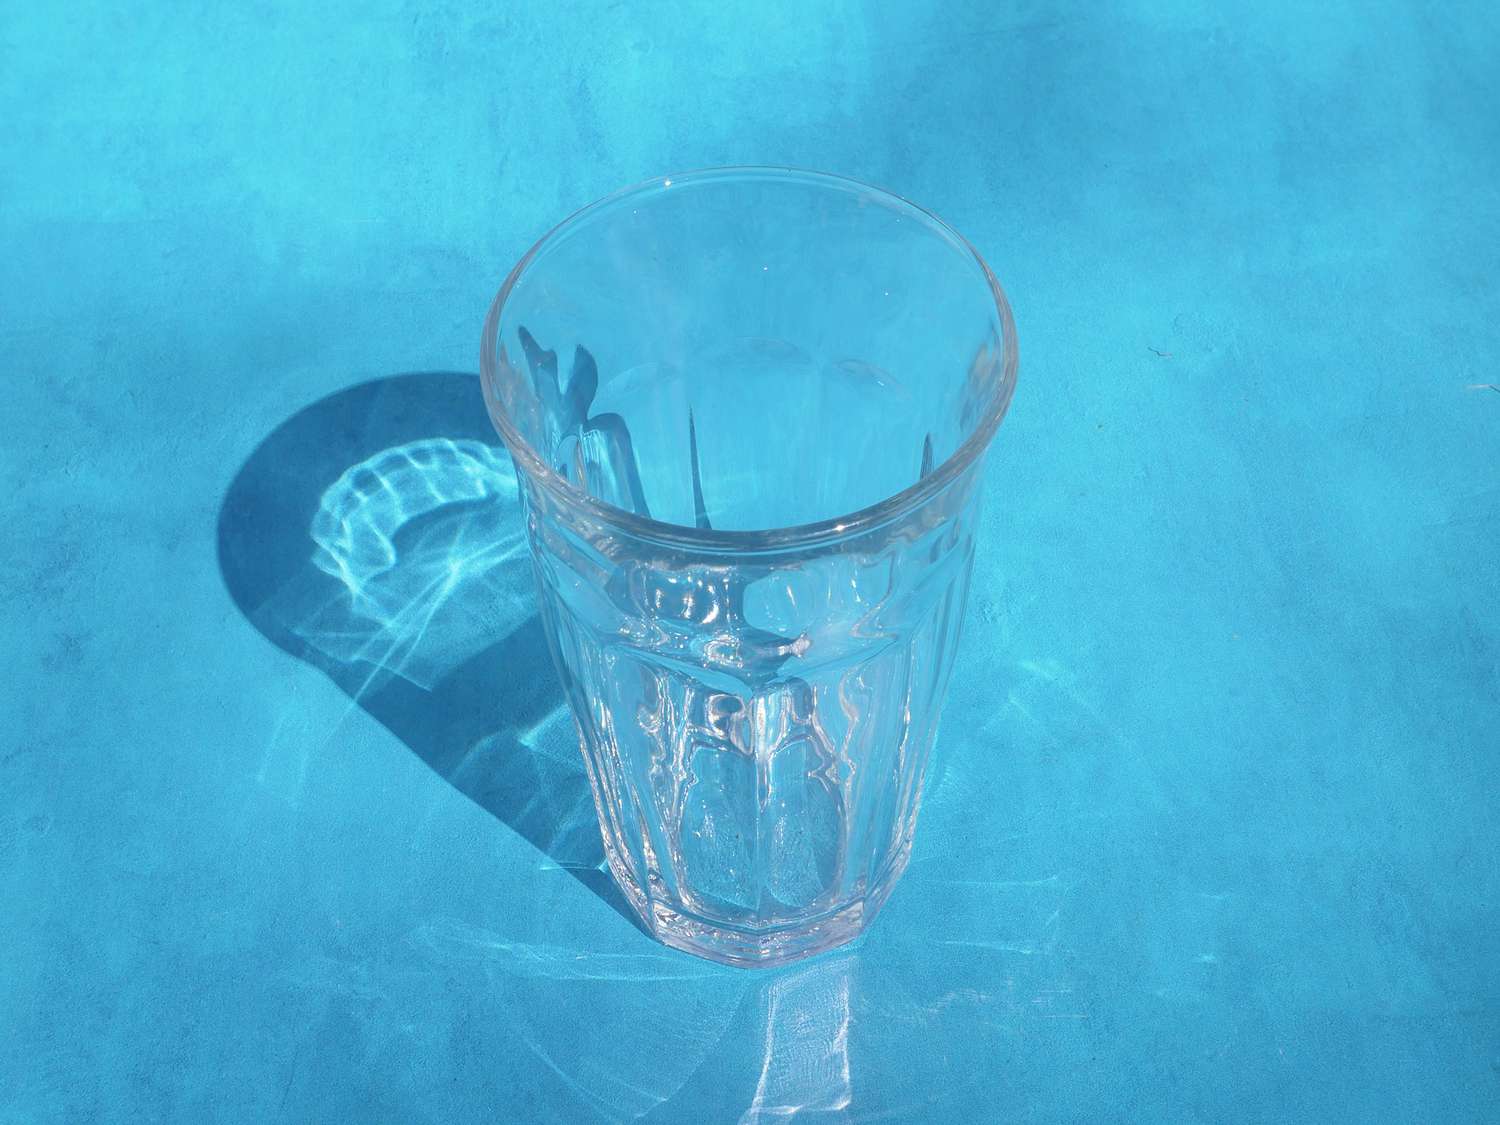 the duralex glass on a blue backdrop